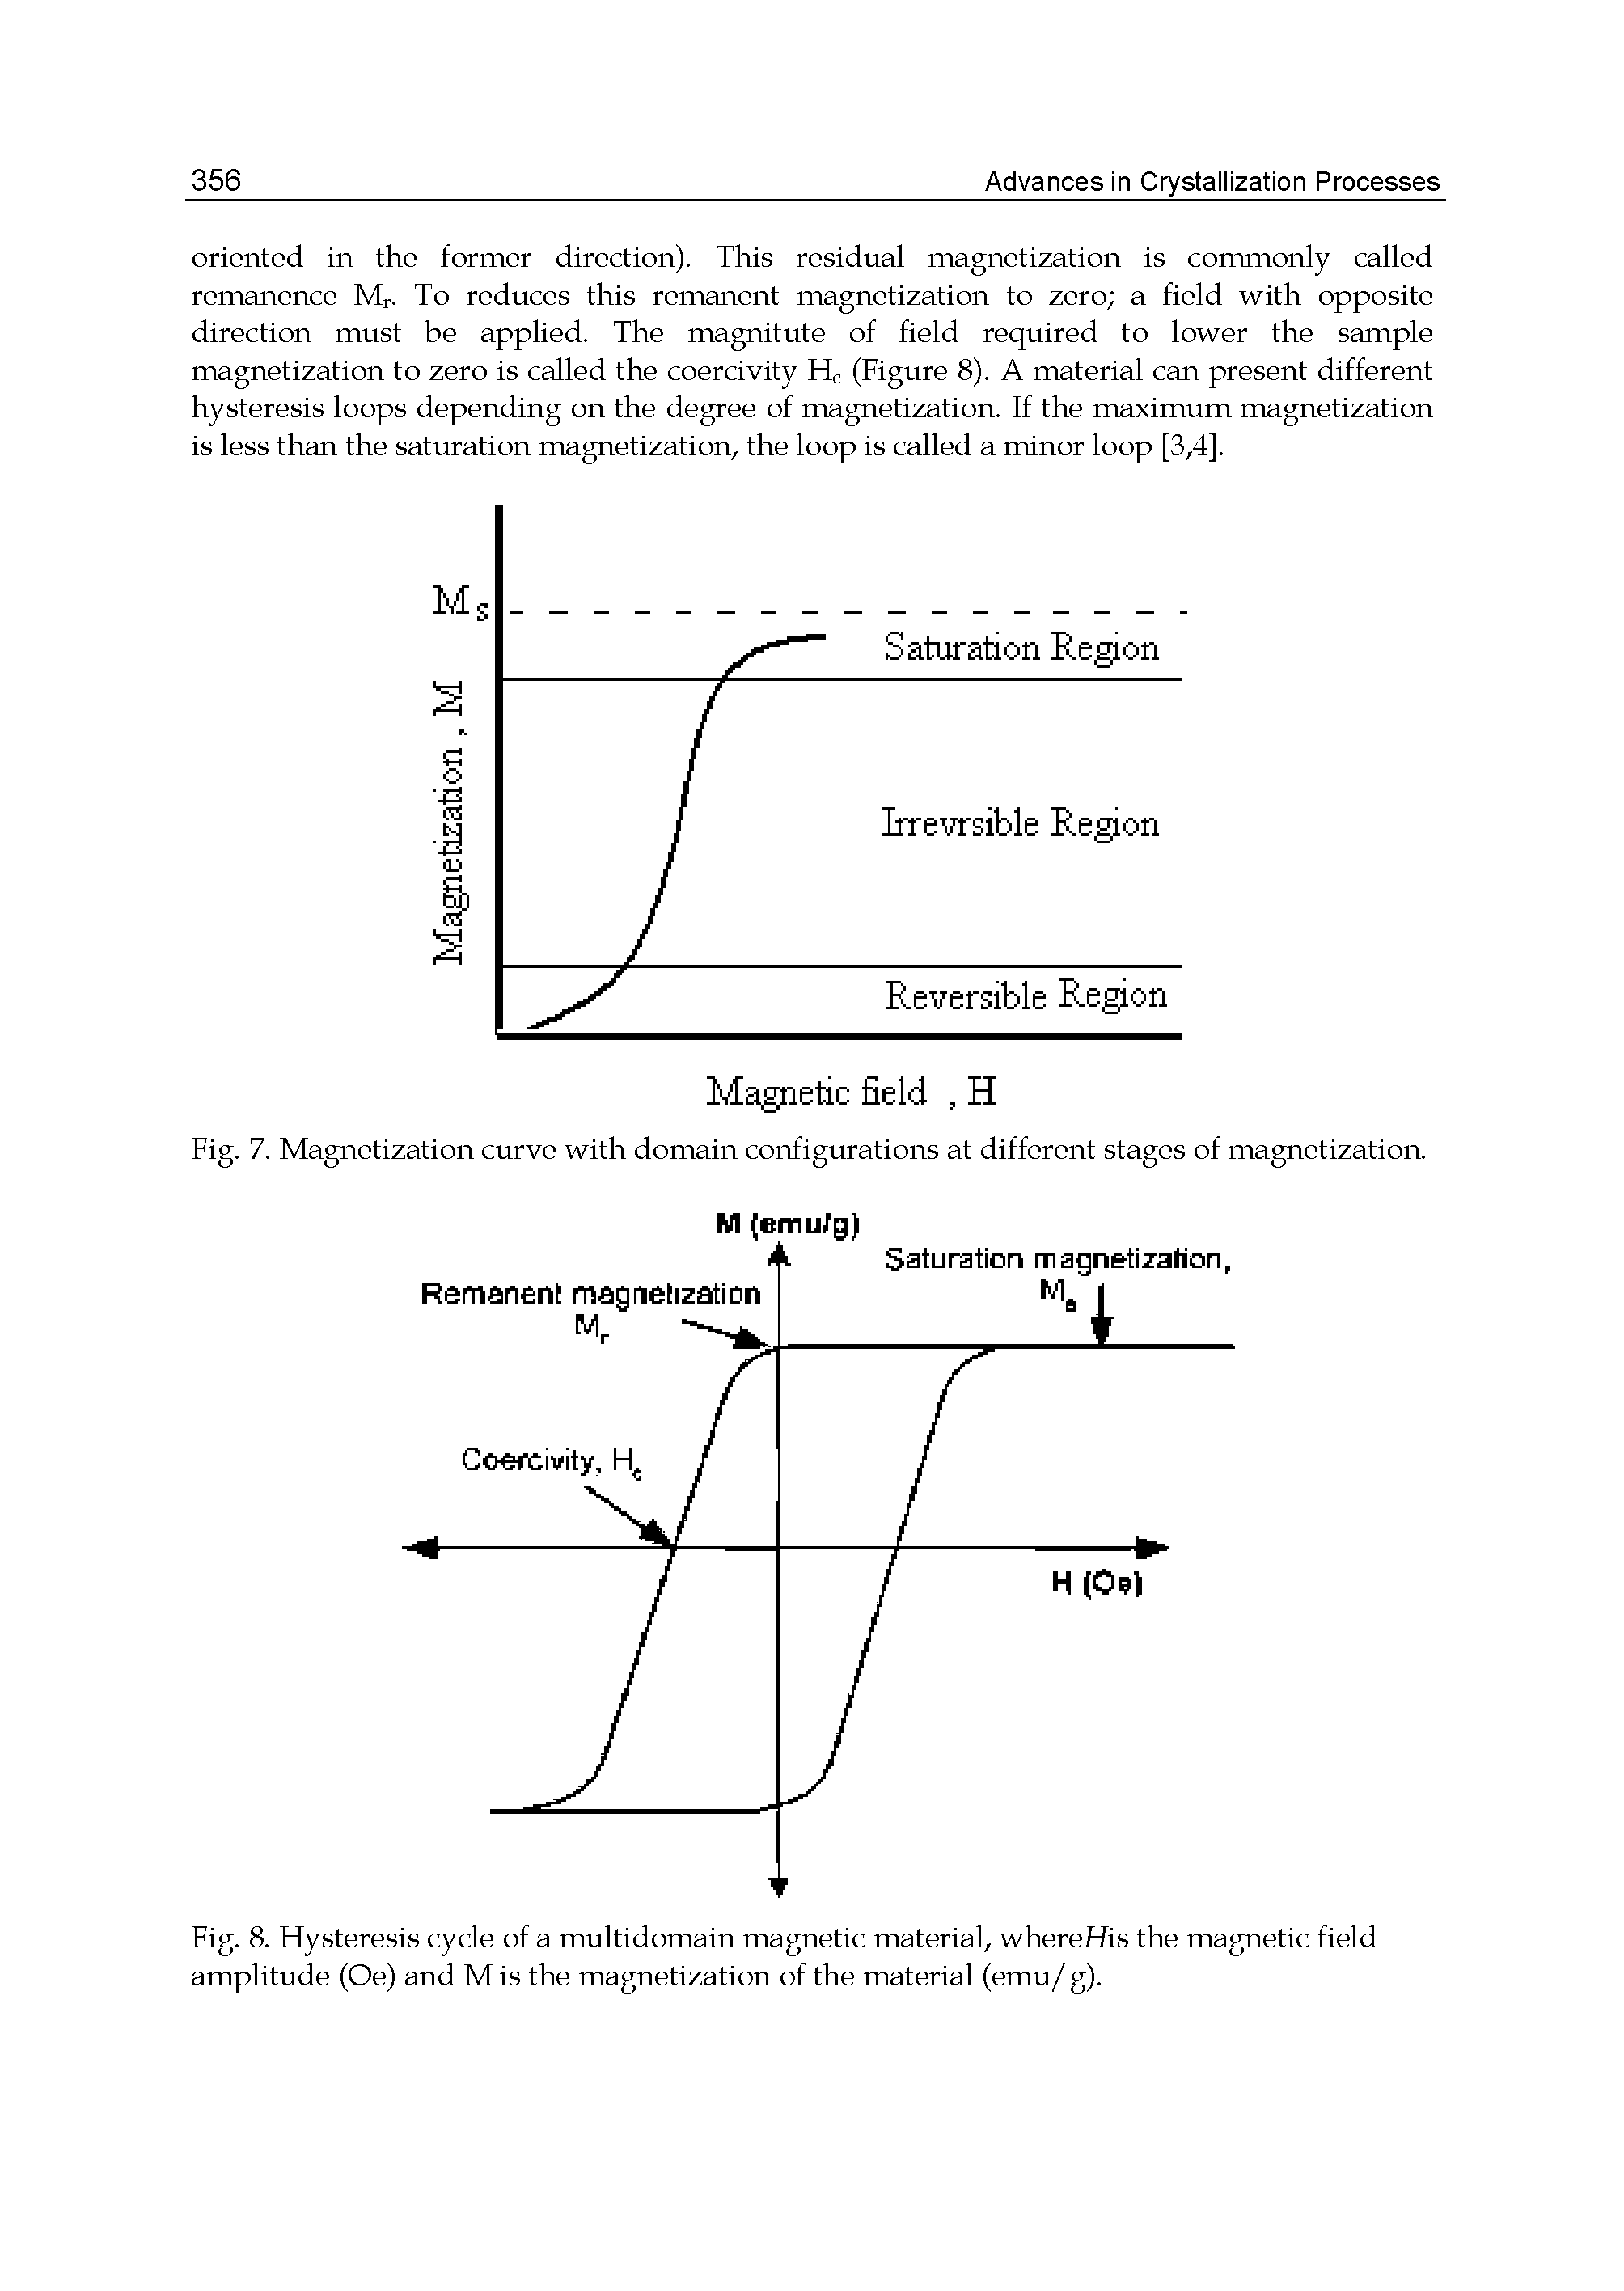 Fig. 8. Hysteresis cycle of a multidomain magnetic material, whereHis the magnetic field amplitude (Oe) and M is the magnetization of the material (emu/ g).